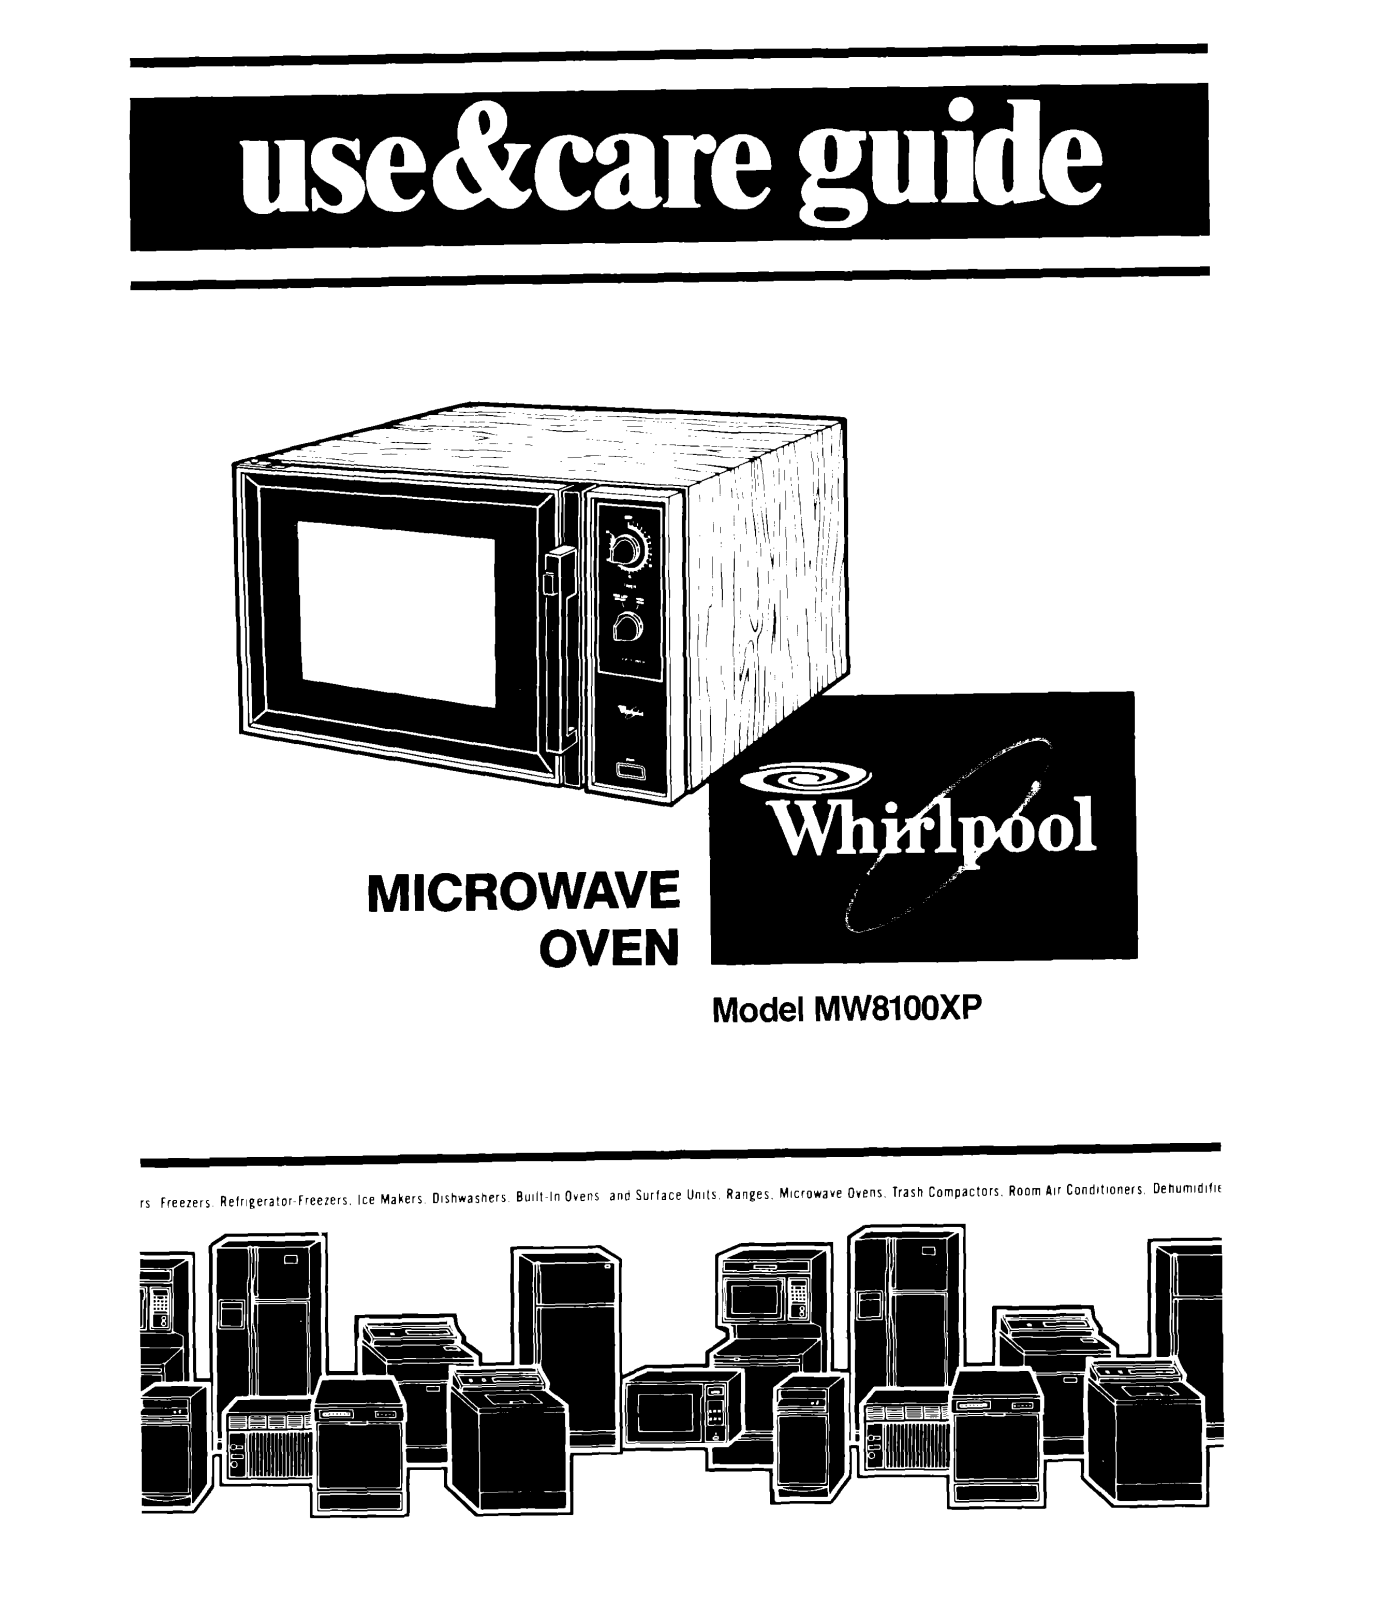 Whirlpool MW8100XP0 Owner’s Manual